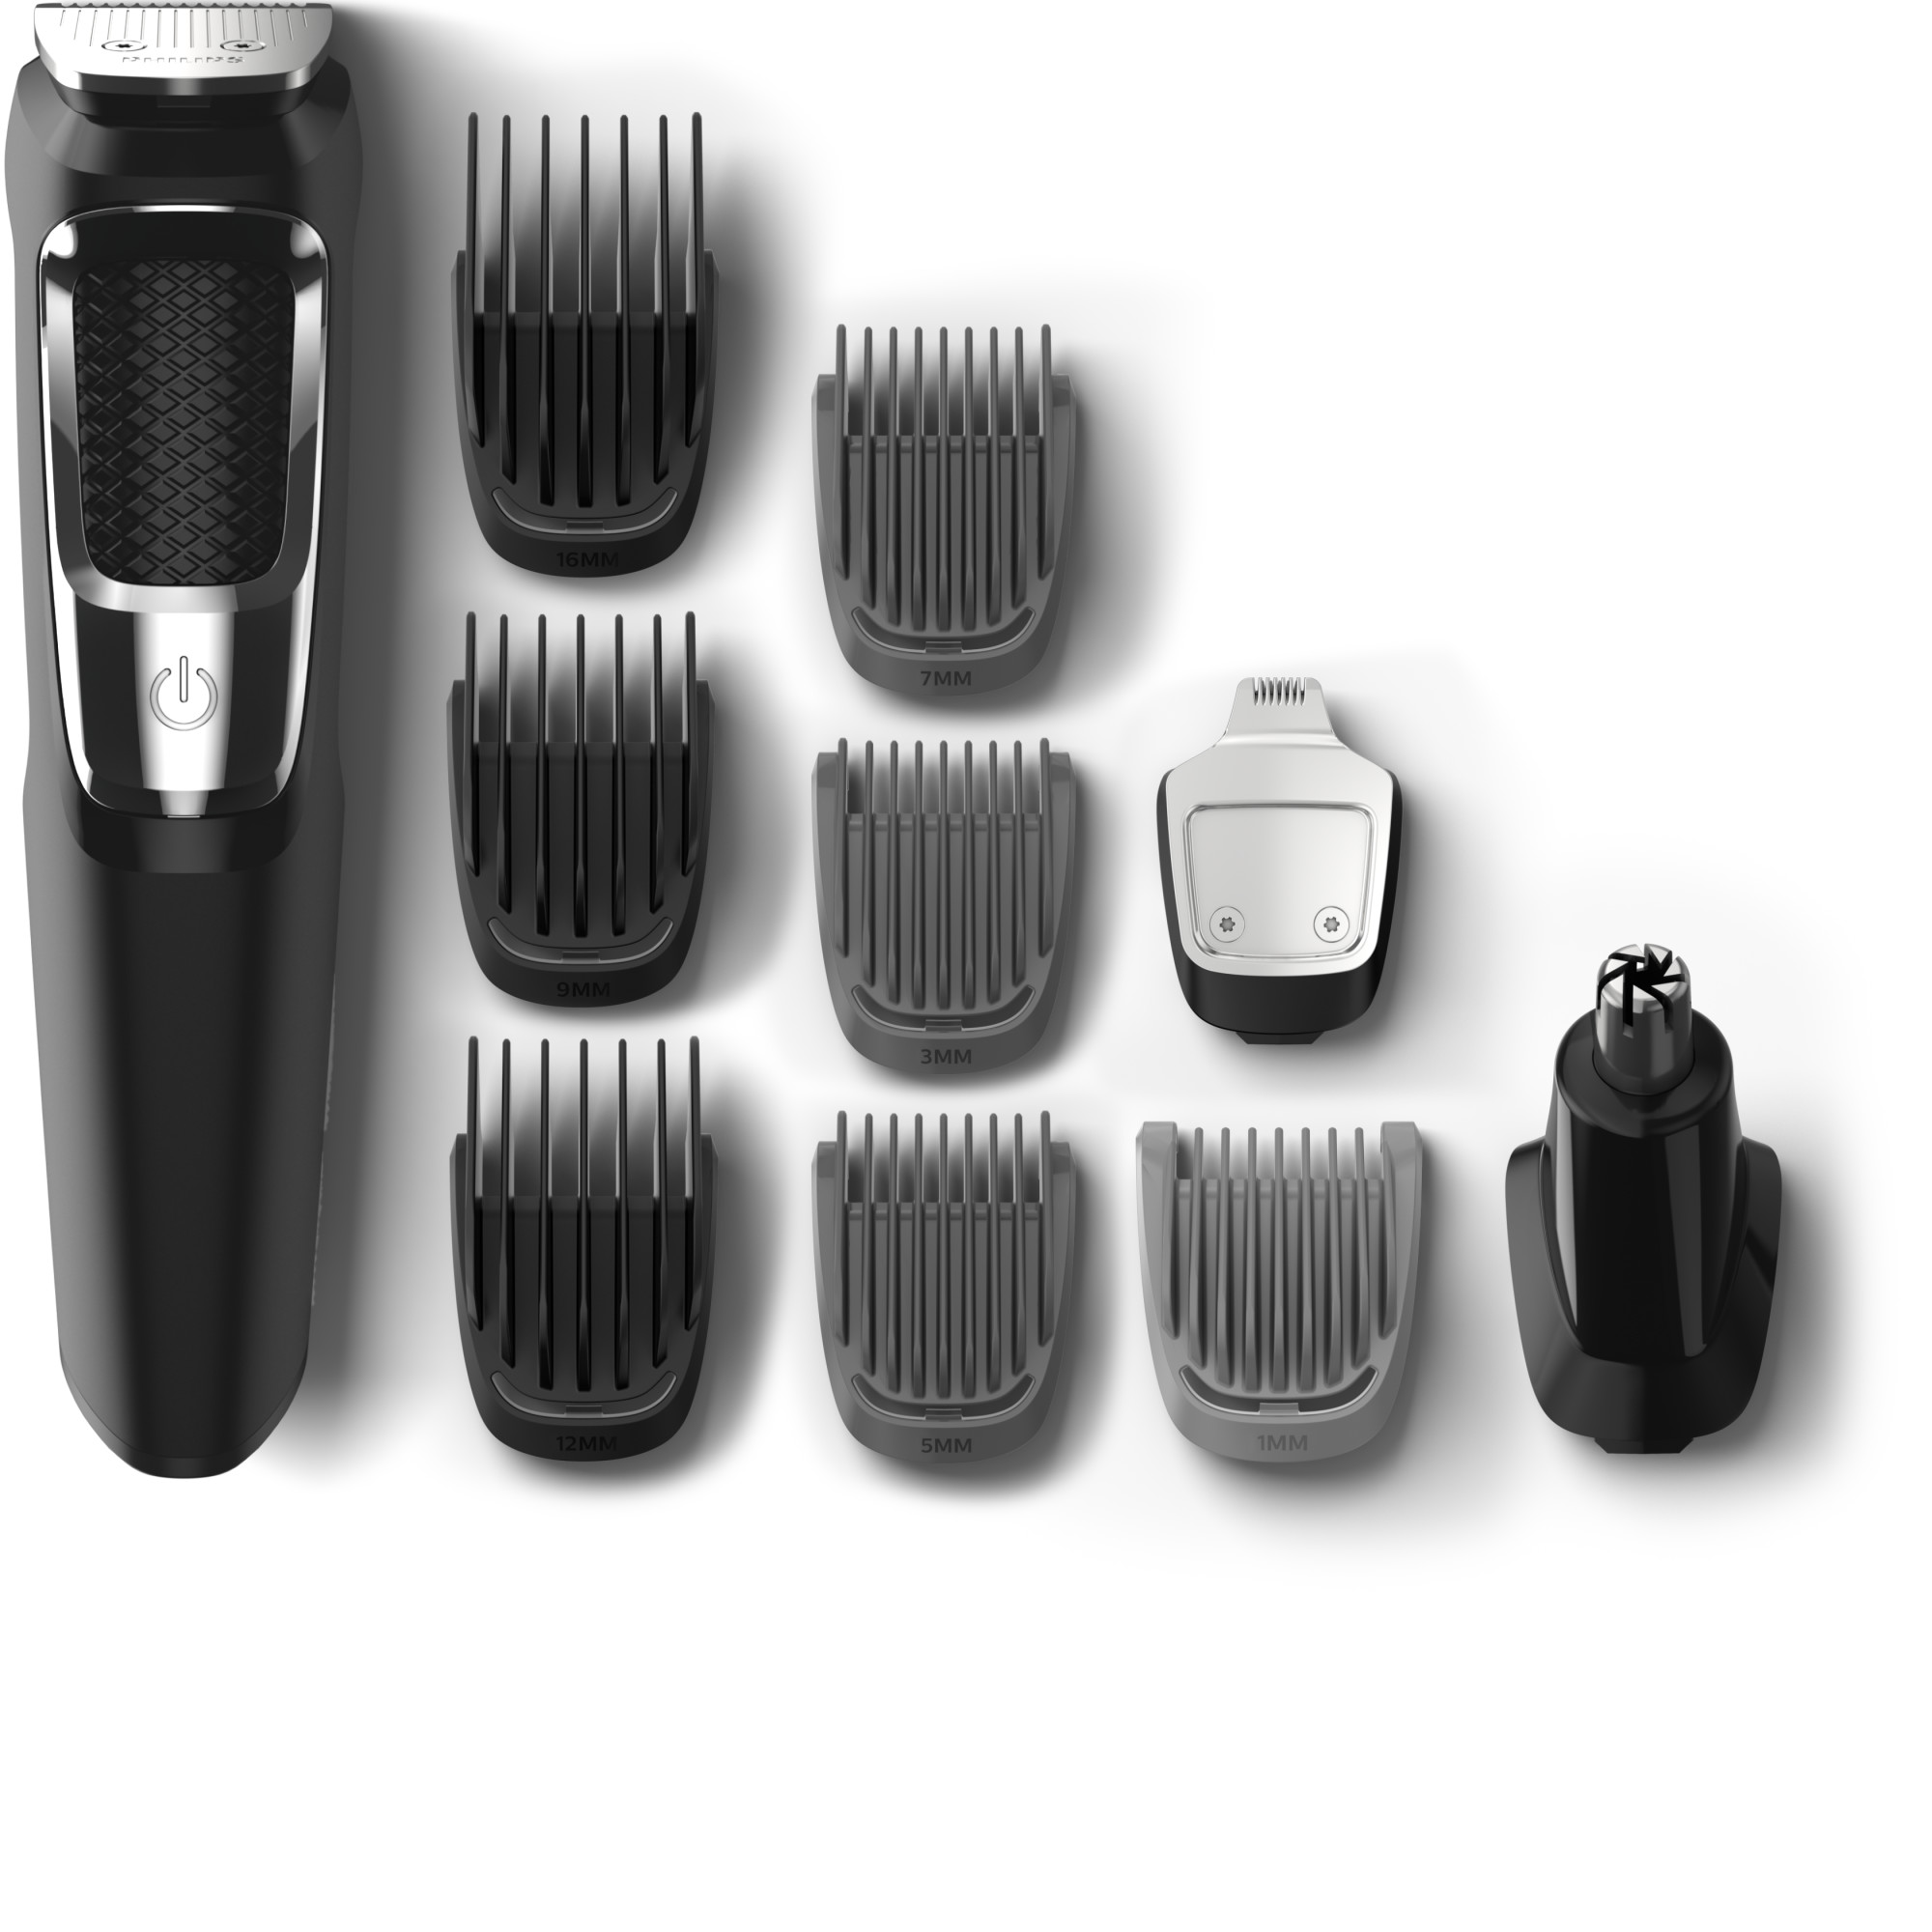 Philips Norelco Multi Groomer - 13 Piece Mens Grooming Kit For Beard, Face, Nose, and Ear Hair Trimmer and Hair Clipper - No Blade Oil Needed, MG3750/60 - image 3 of 34